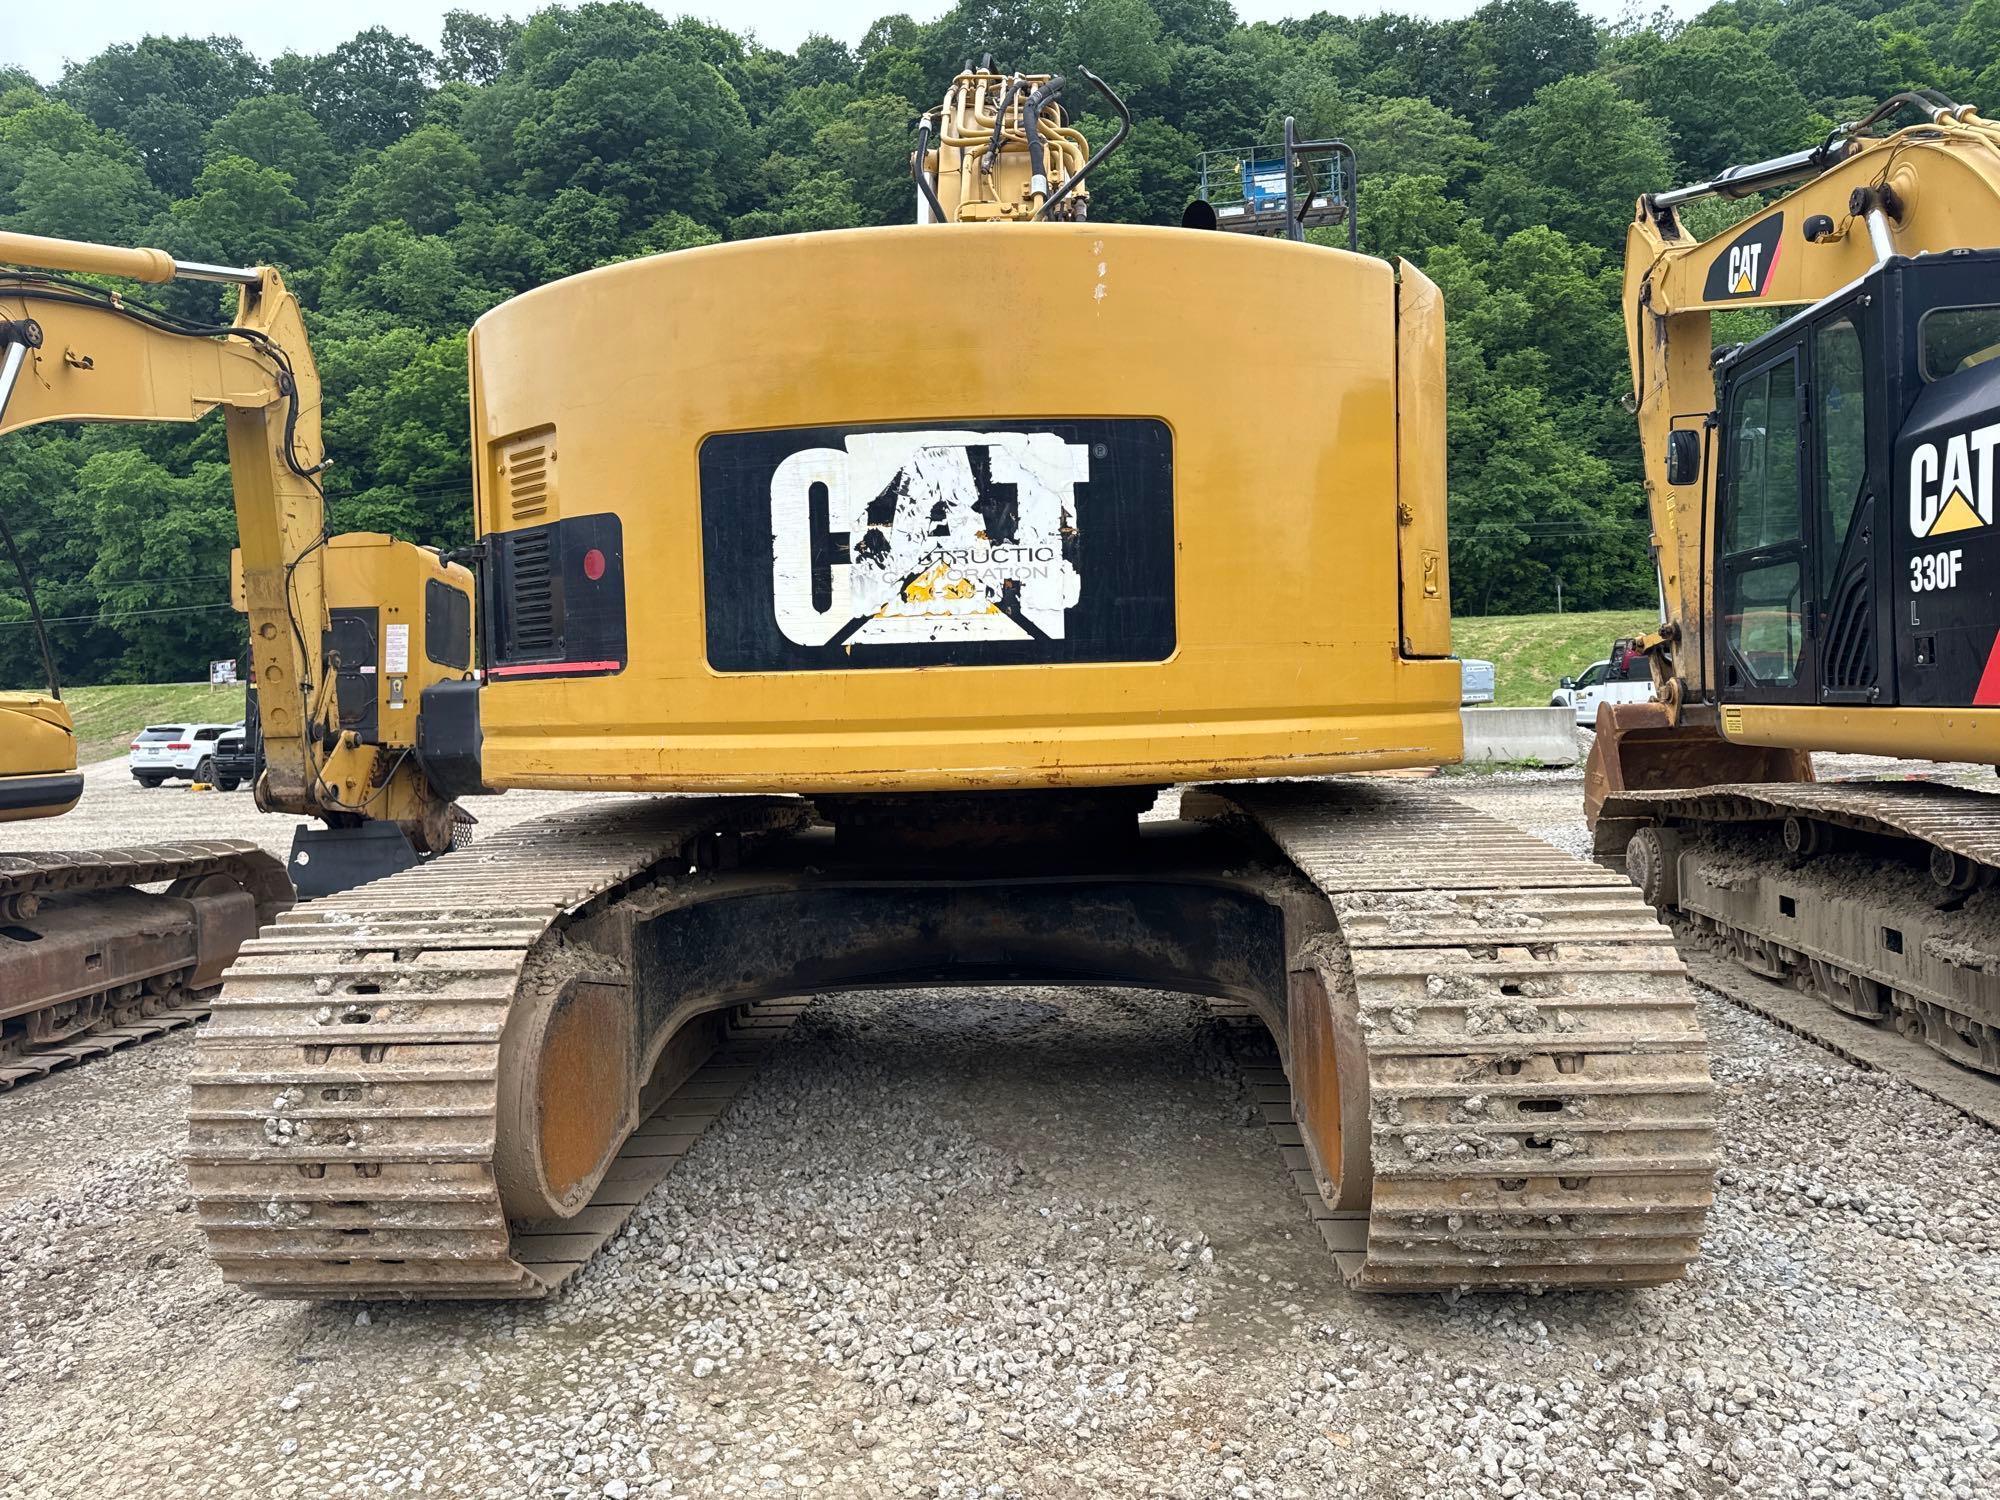 CAT 328D HYDRAULIC EXCAVATOR SN:GTN00188 powered by Cat C7 diesel engine, equipped with Cab, air,